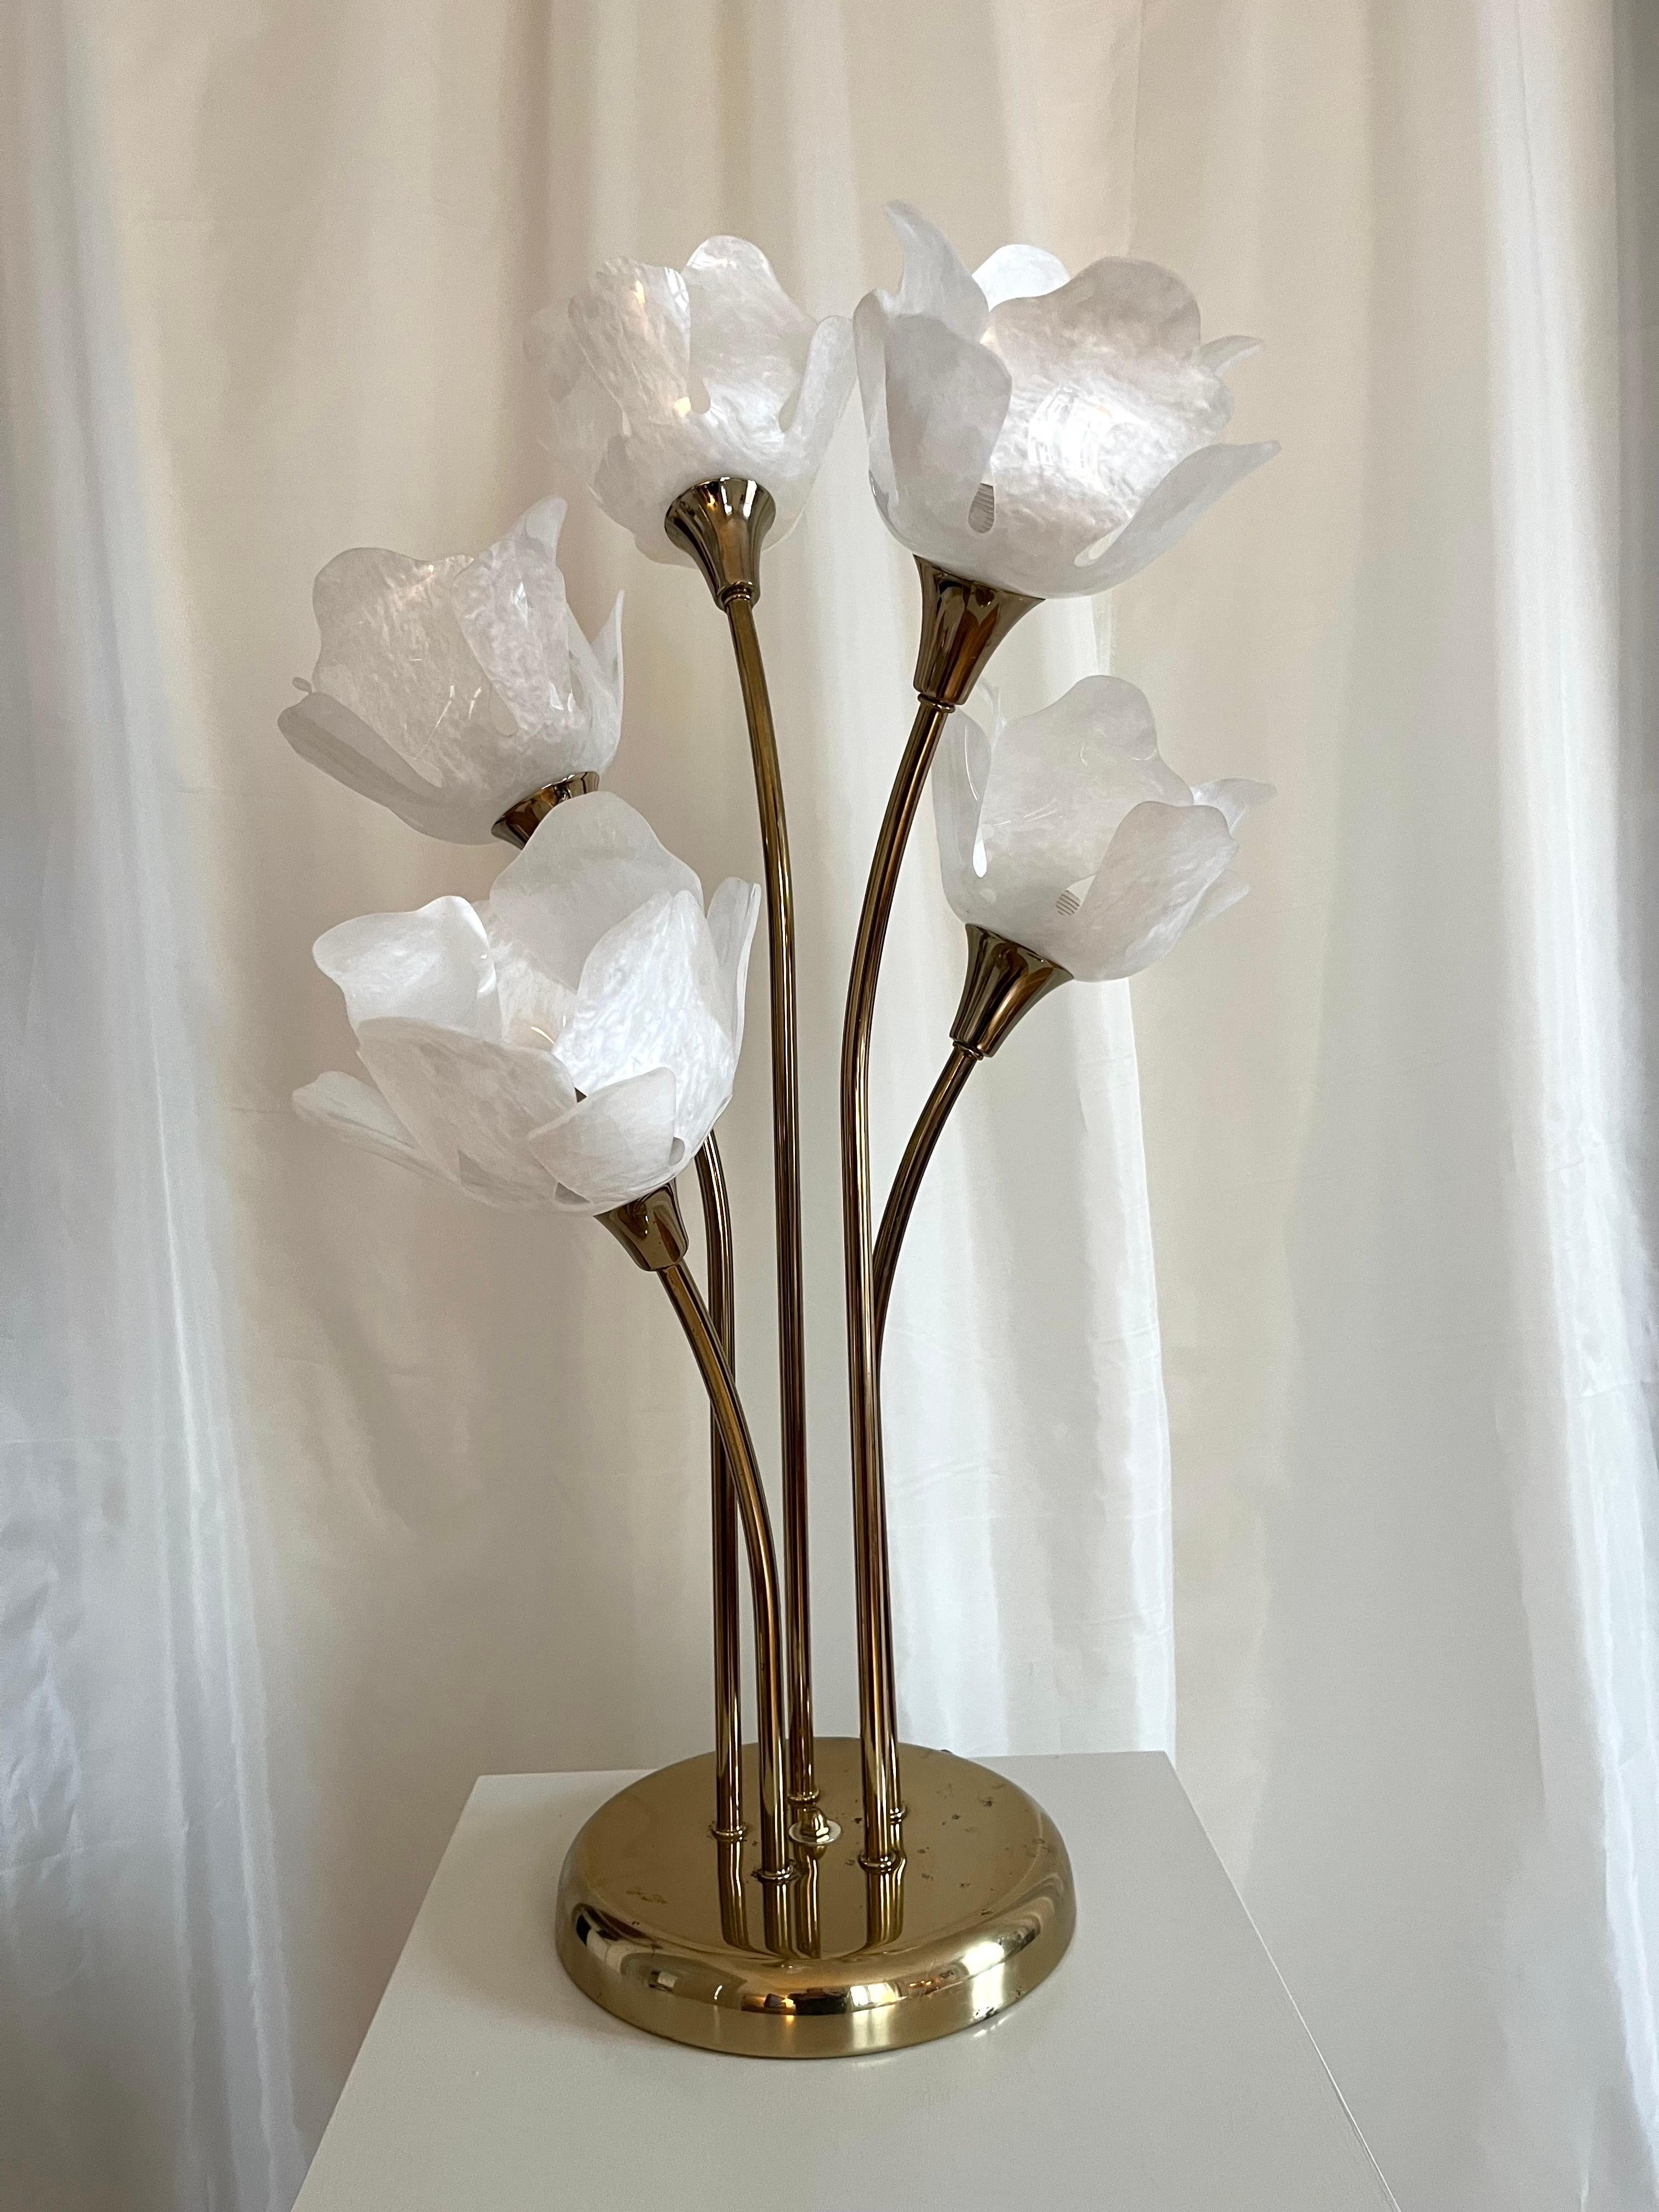 Swedish Vintage Brass Table Lamp with Flower-Shaped Pearl-Like Shades

Striking Swedish vintage table lamp crafted in brass, adorned with pearl-like plastic shades in flower shapes. Featuring five arms and shades, this lamp exudes a high decorative